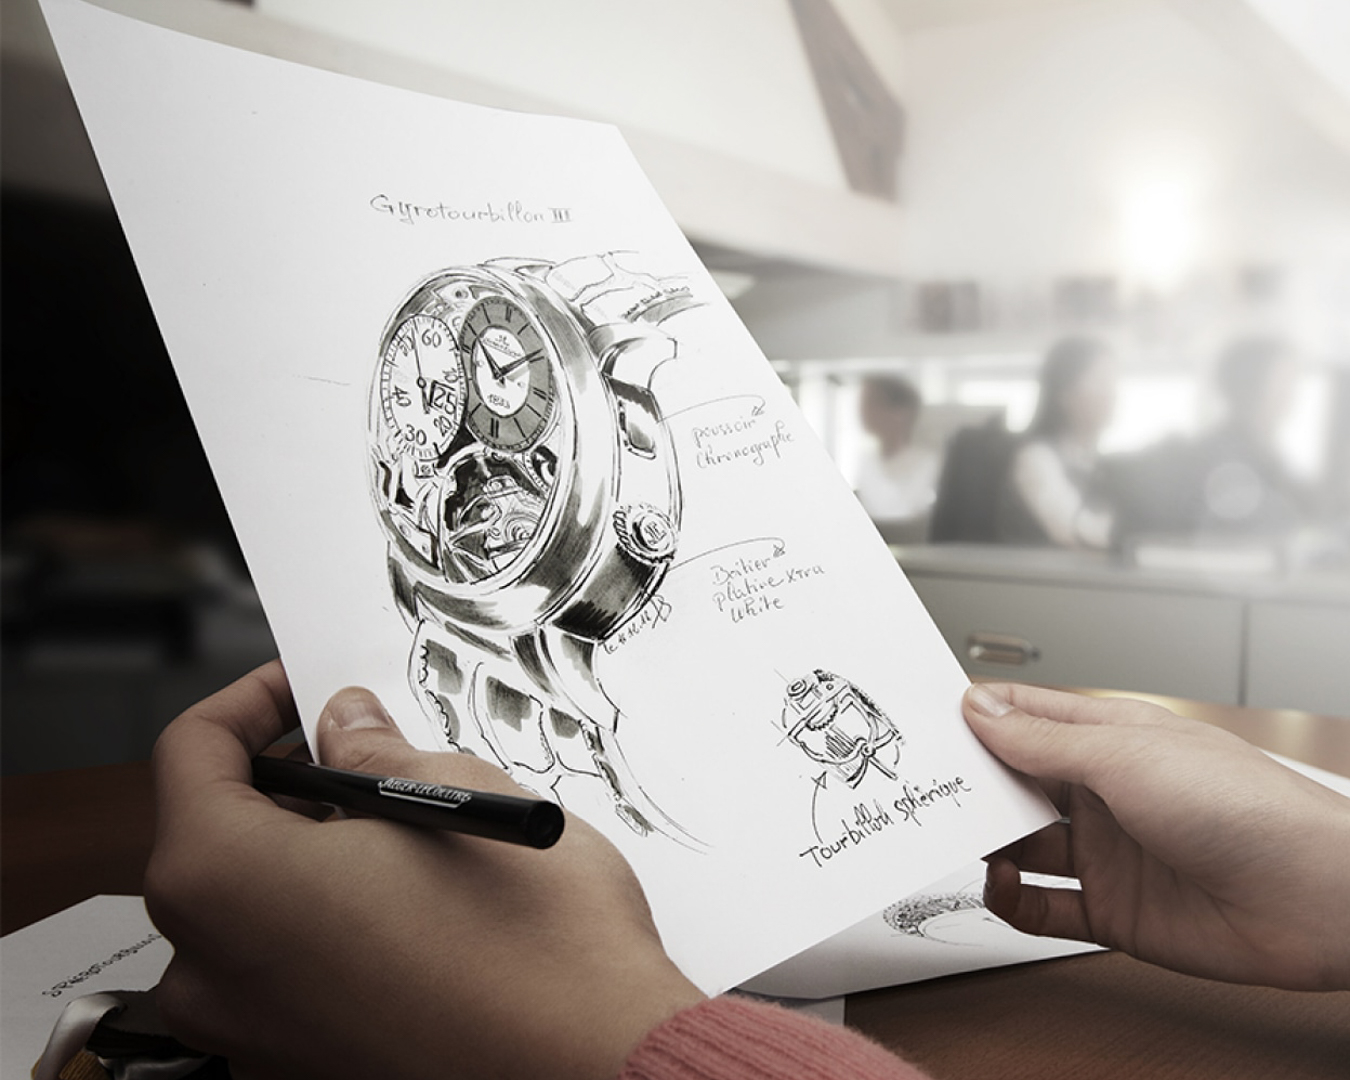 Design : in the heart of Jaeger-LeCoultre’s creativity